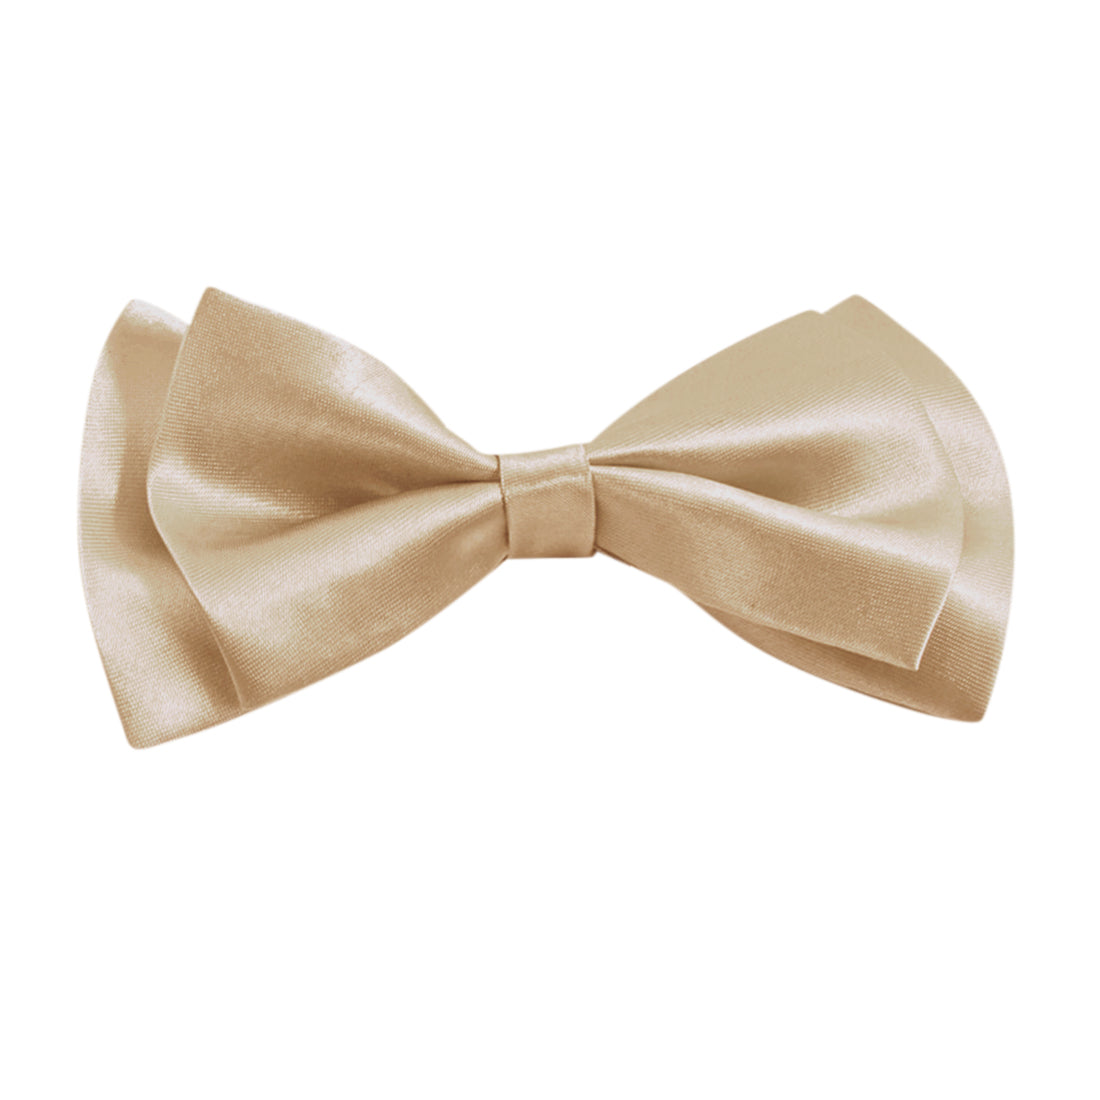 Allegra K Adjustable Pre-tied Solid Party Prom Tuxedo Bowknot Bowtie